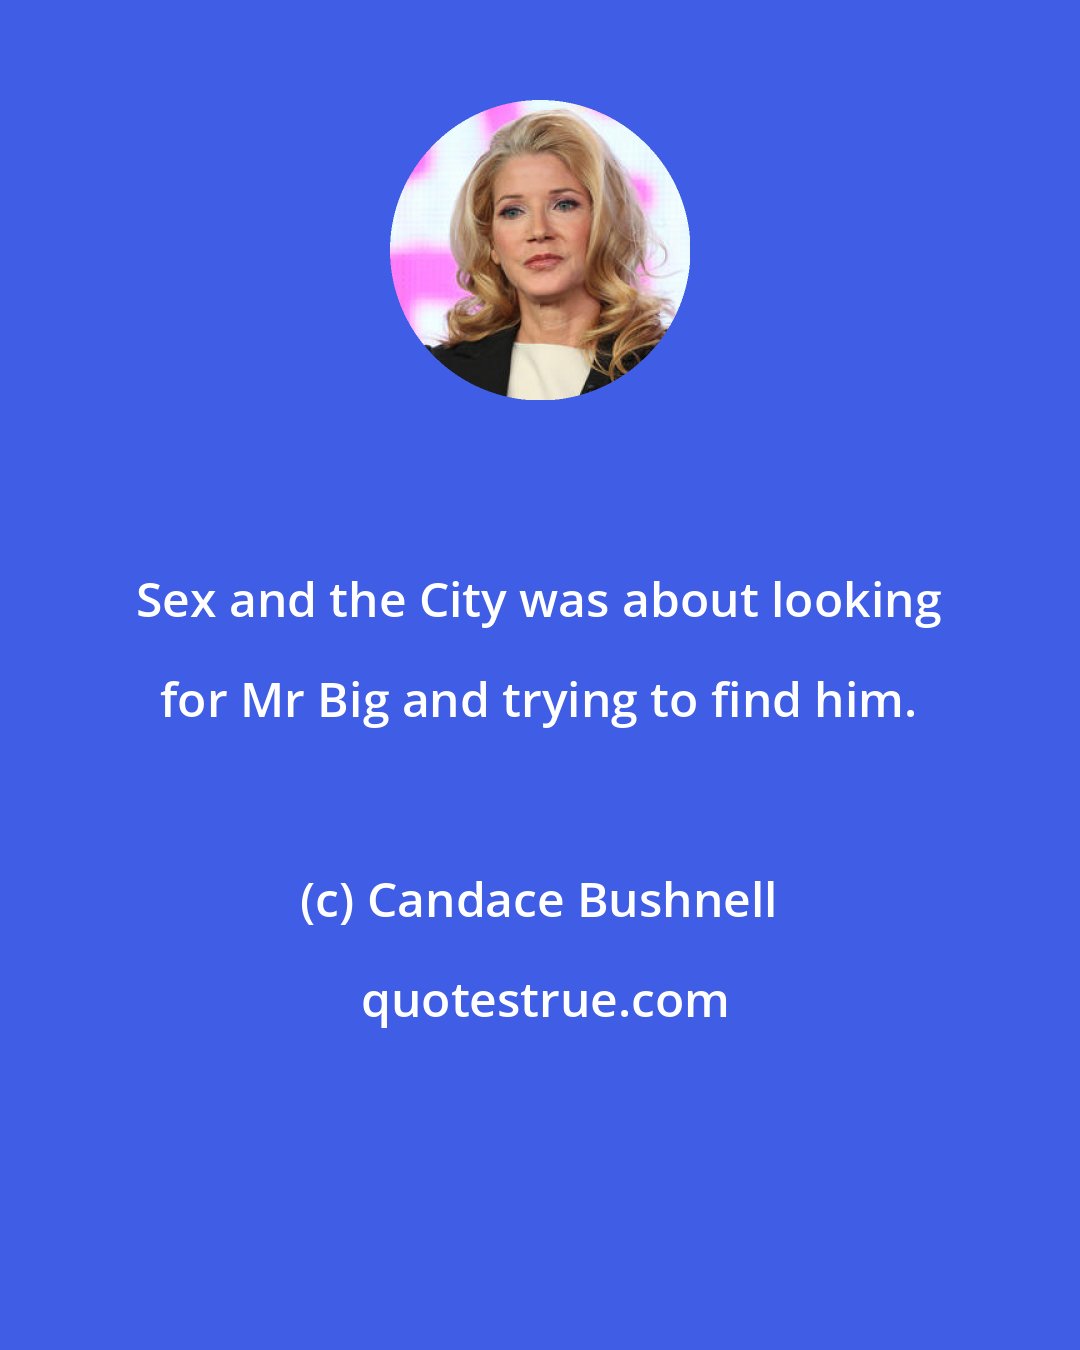 Candace Bushnell: Sex and the City was about looking for Mr Big and trying to find him.